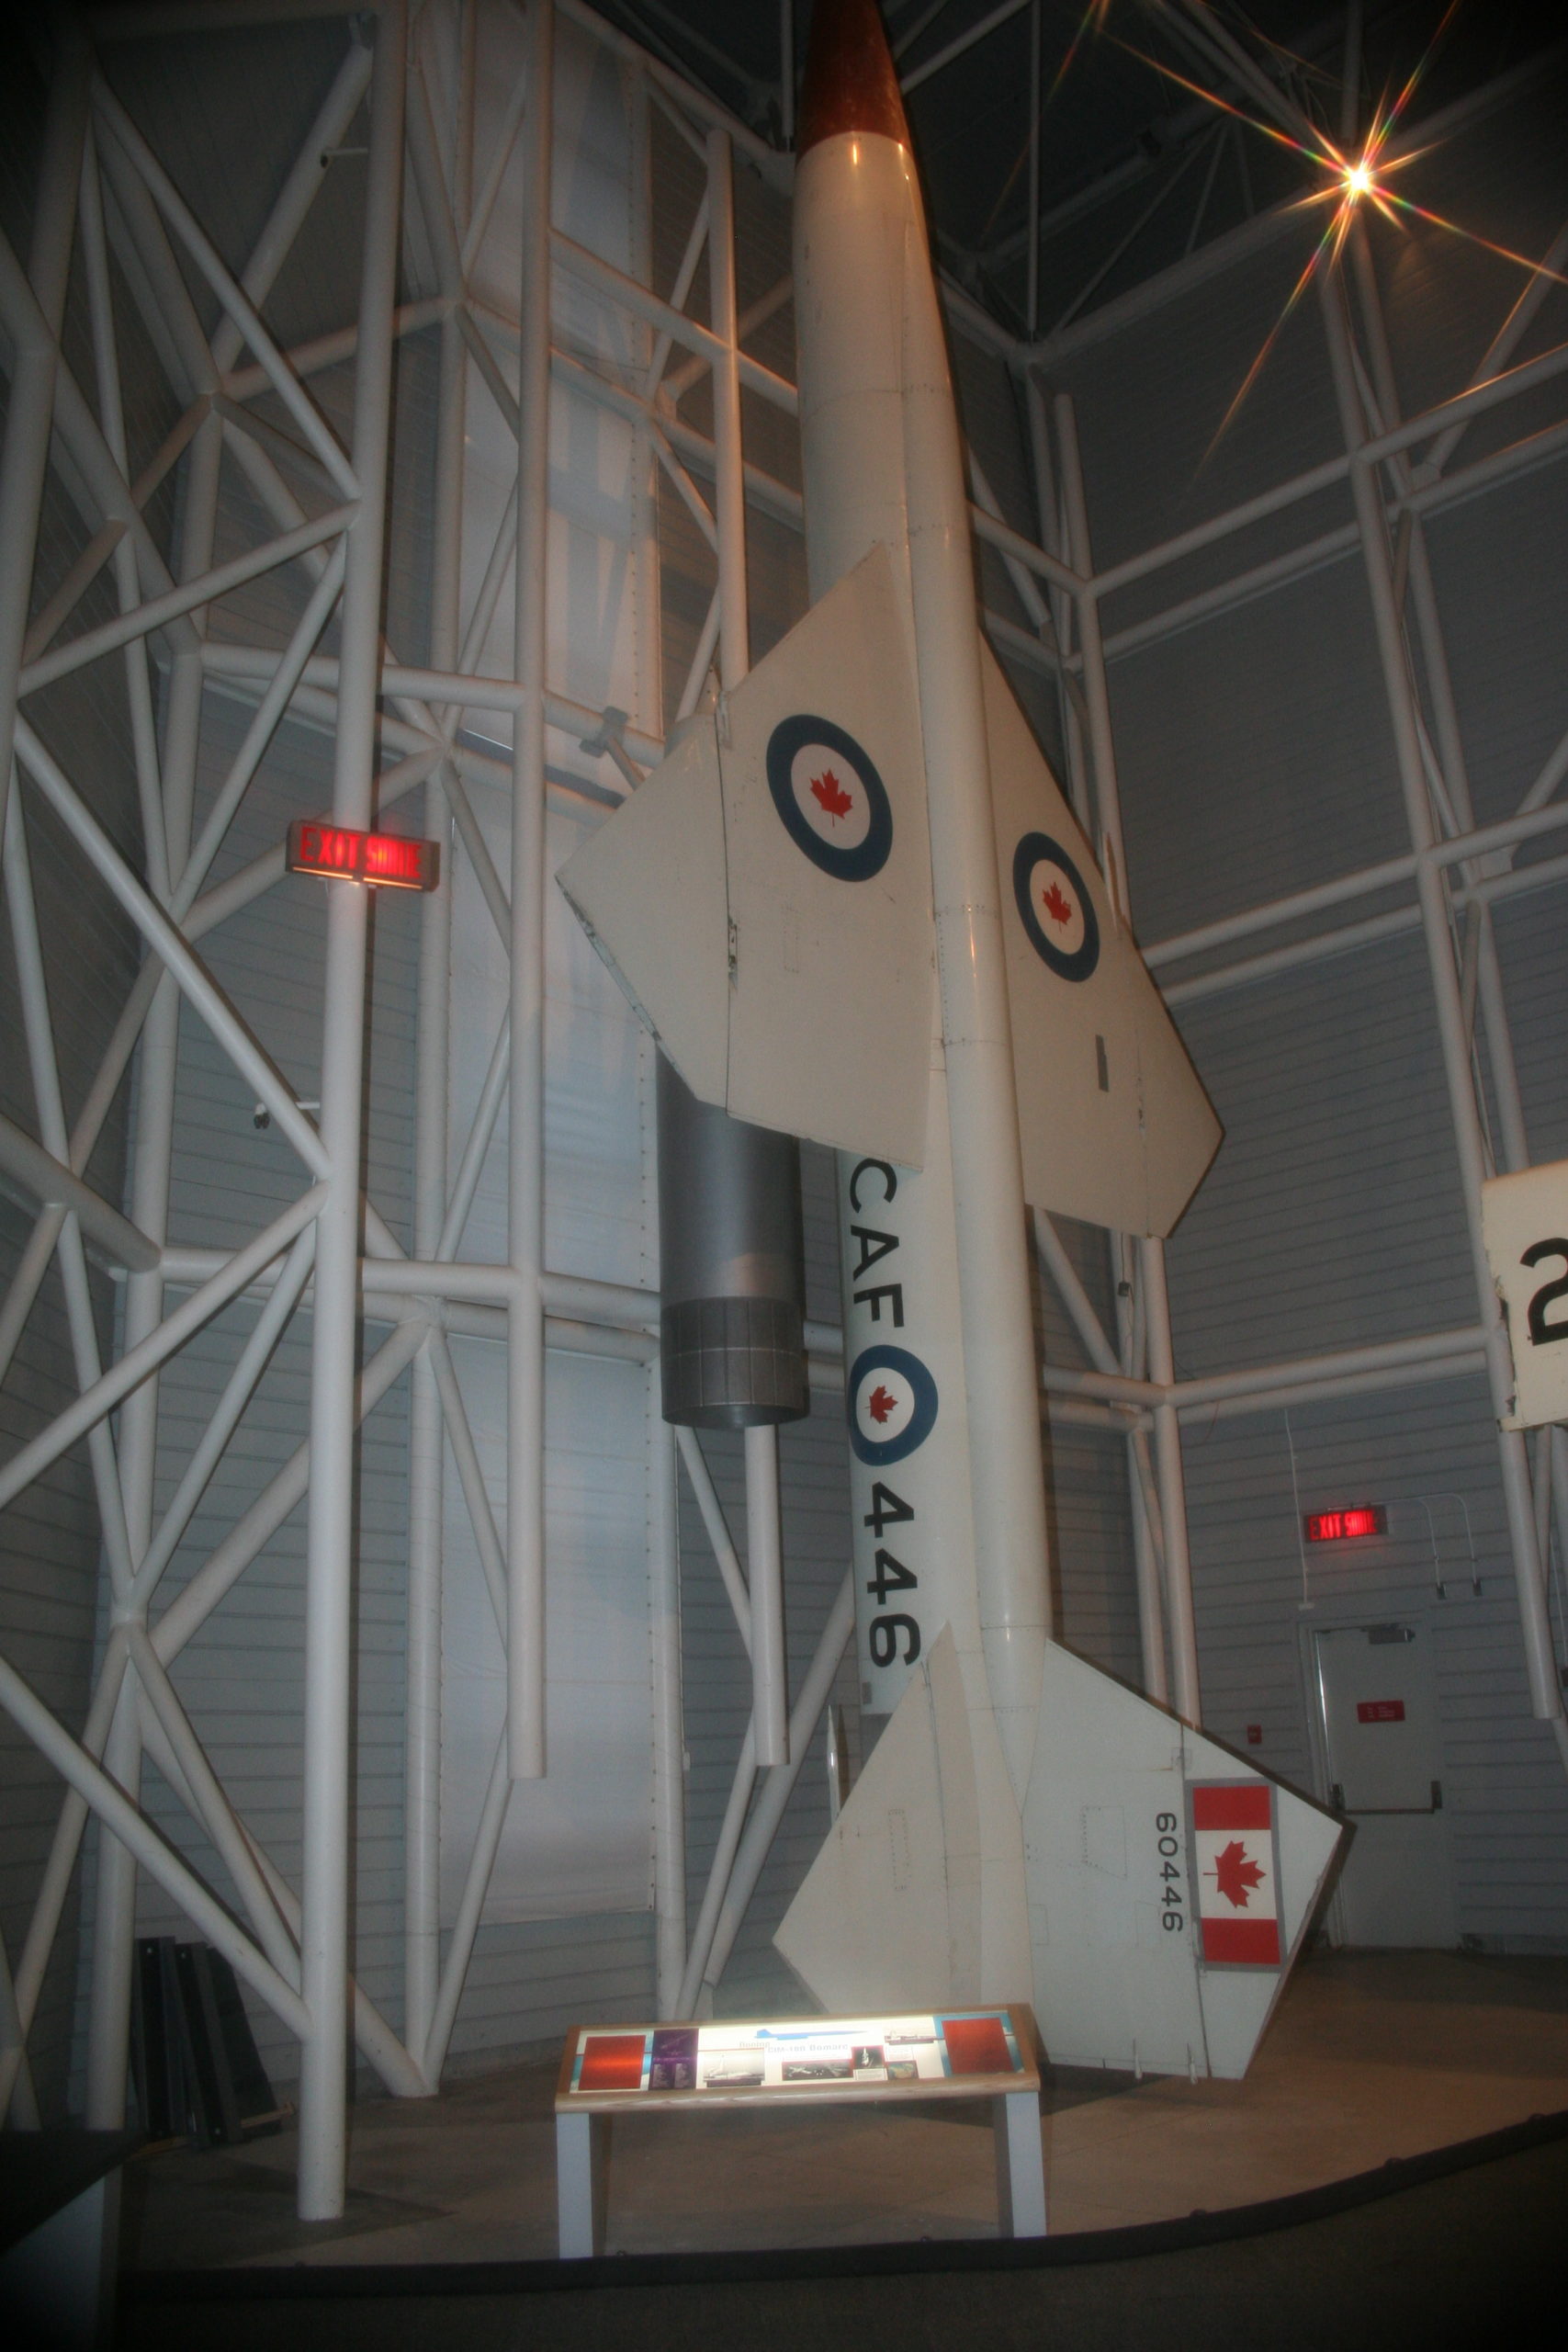 A missile with maple leaves surrounded by blue rings stands upright.